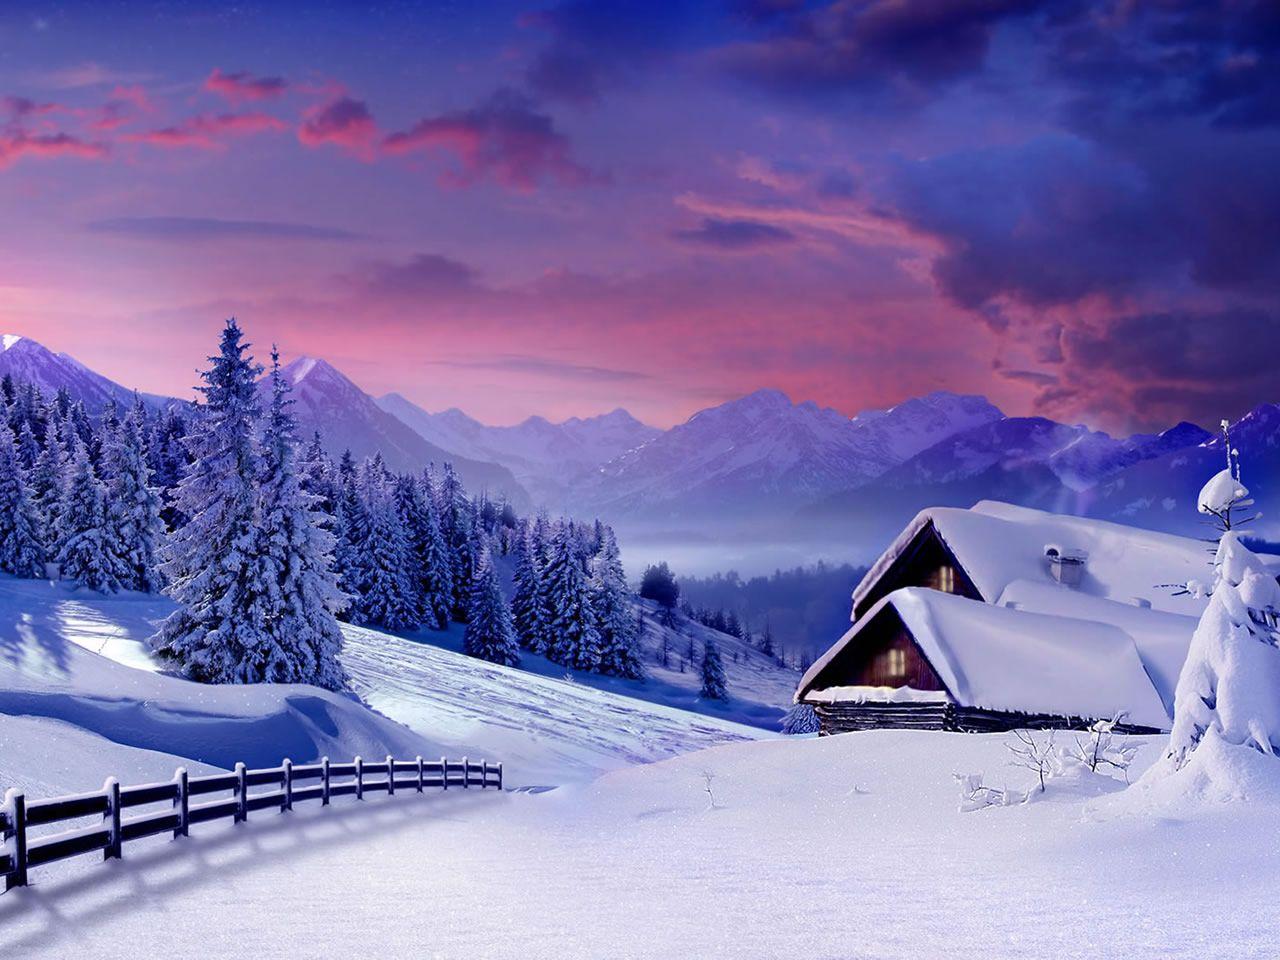 Pink Sunset Wallpaper Winter Cabins Fence Pines Purple Sky Snow